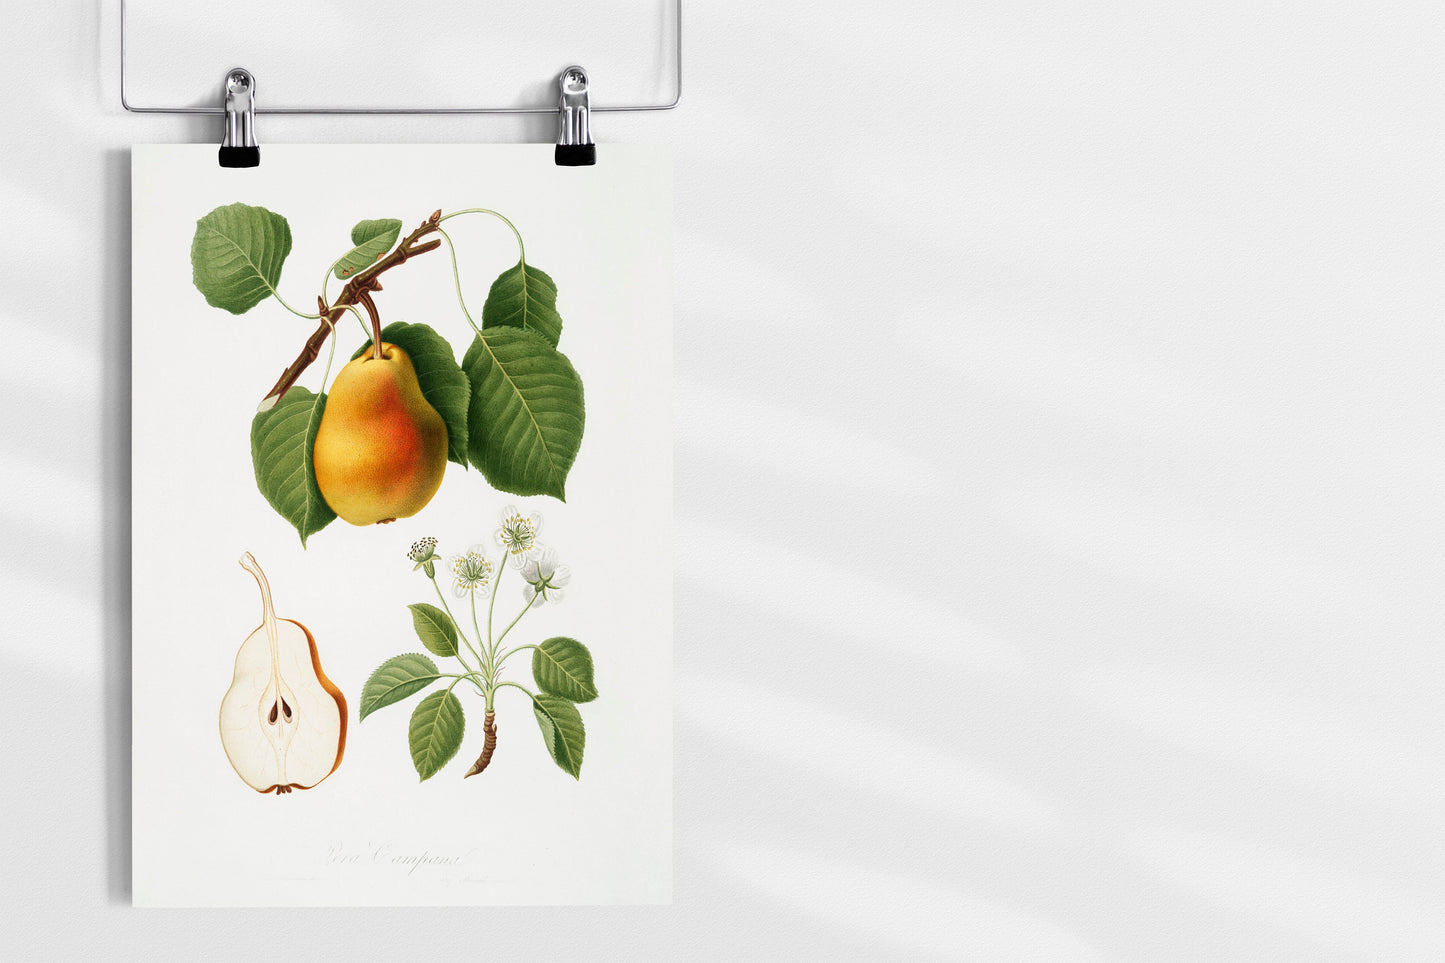 Vintage Pear Illustration Poster Print Wall Hanging Decor A4 A3 A2